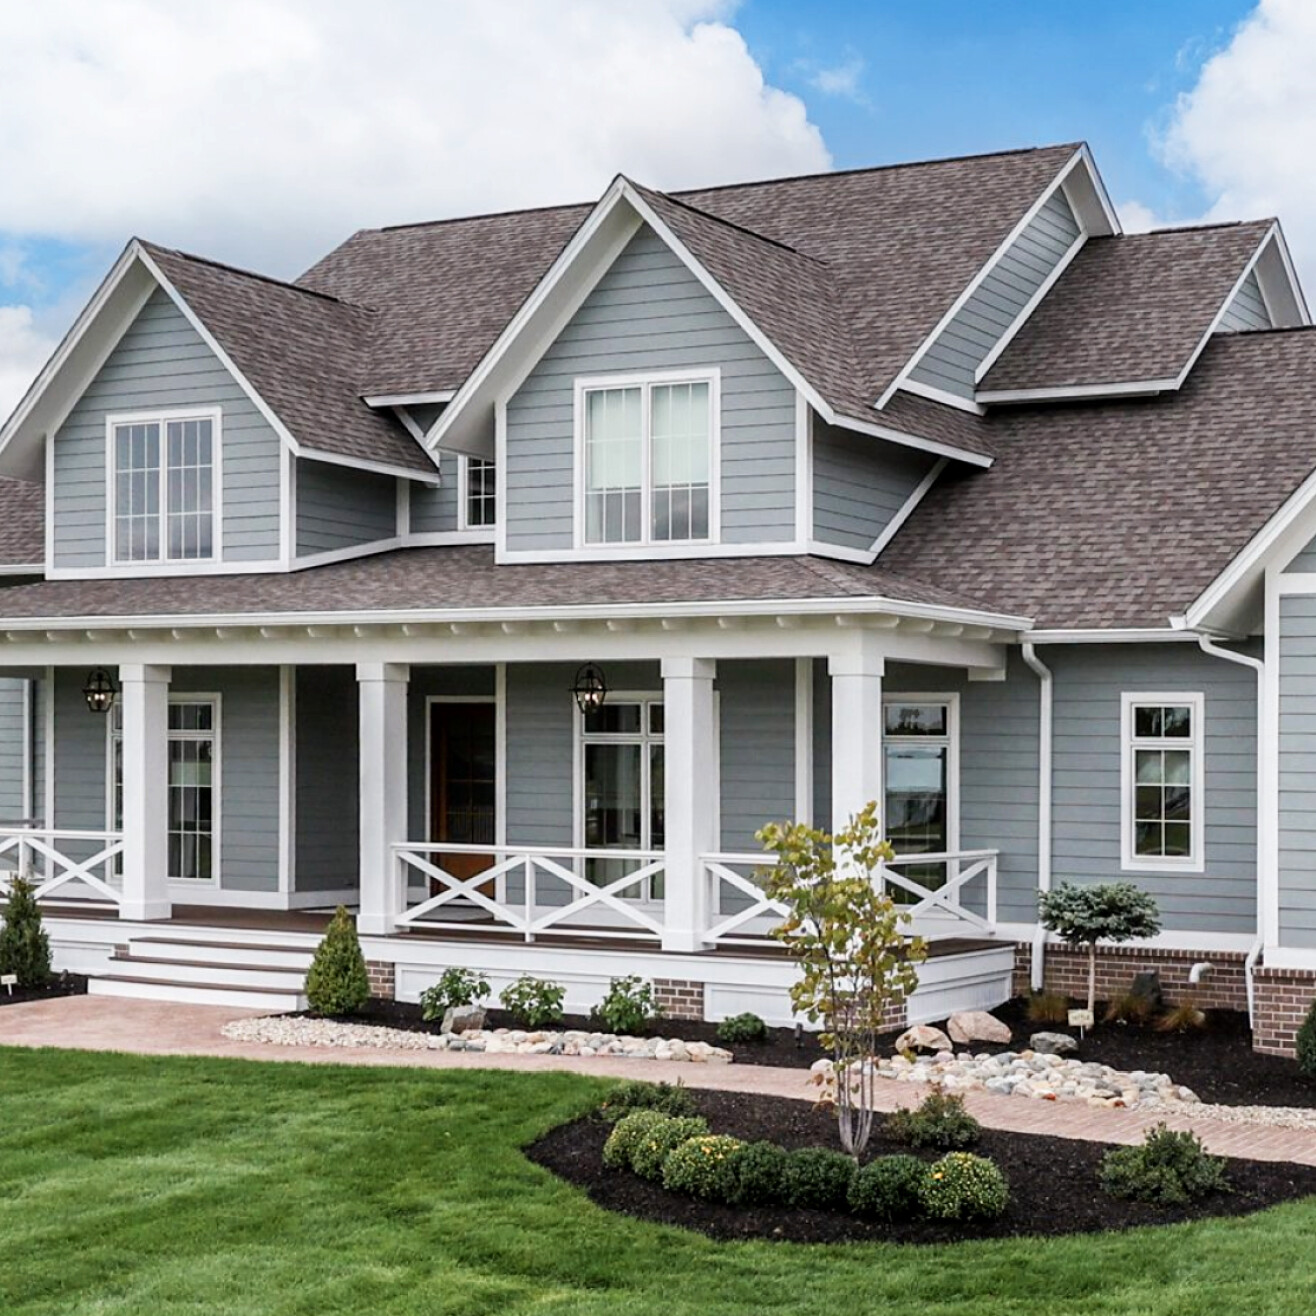 A custom home with gray siding and white trim, built by a reputable custom home builder in Carmel, Indiana.